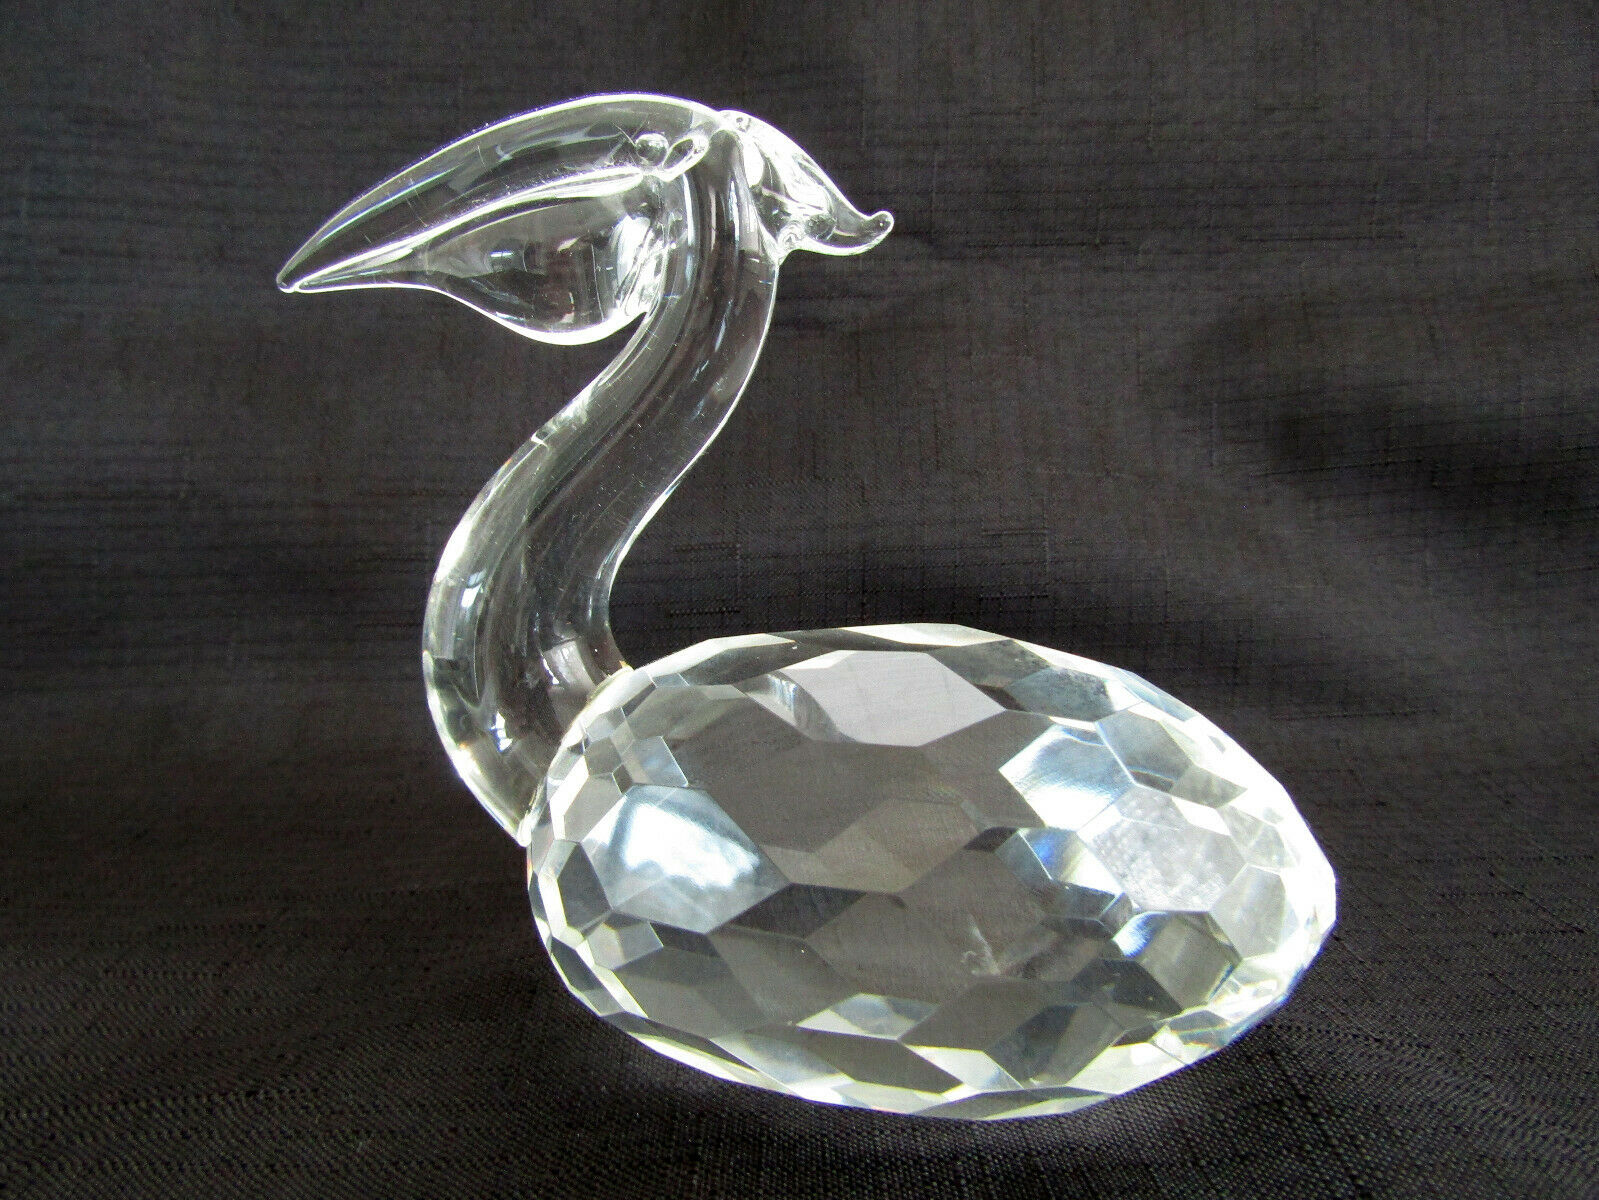 Shannon Crystal Faceted Pelican Figurine Paperweight Ireland Euc